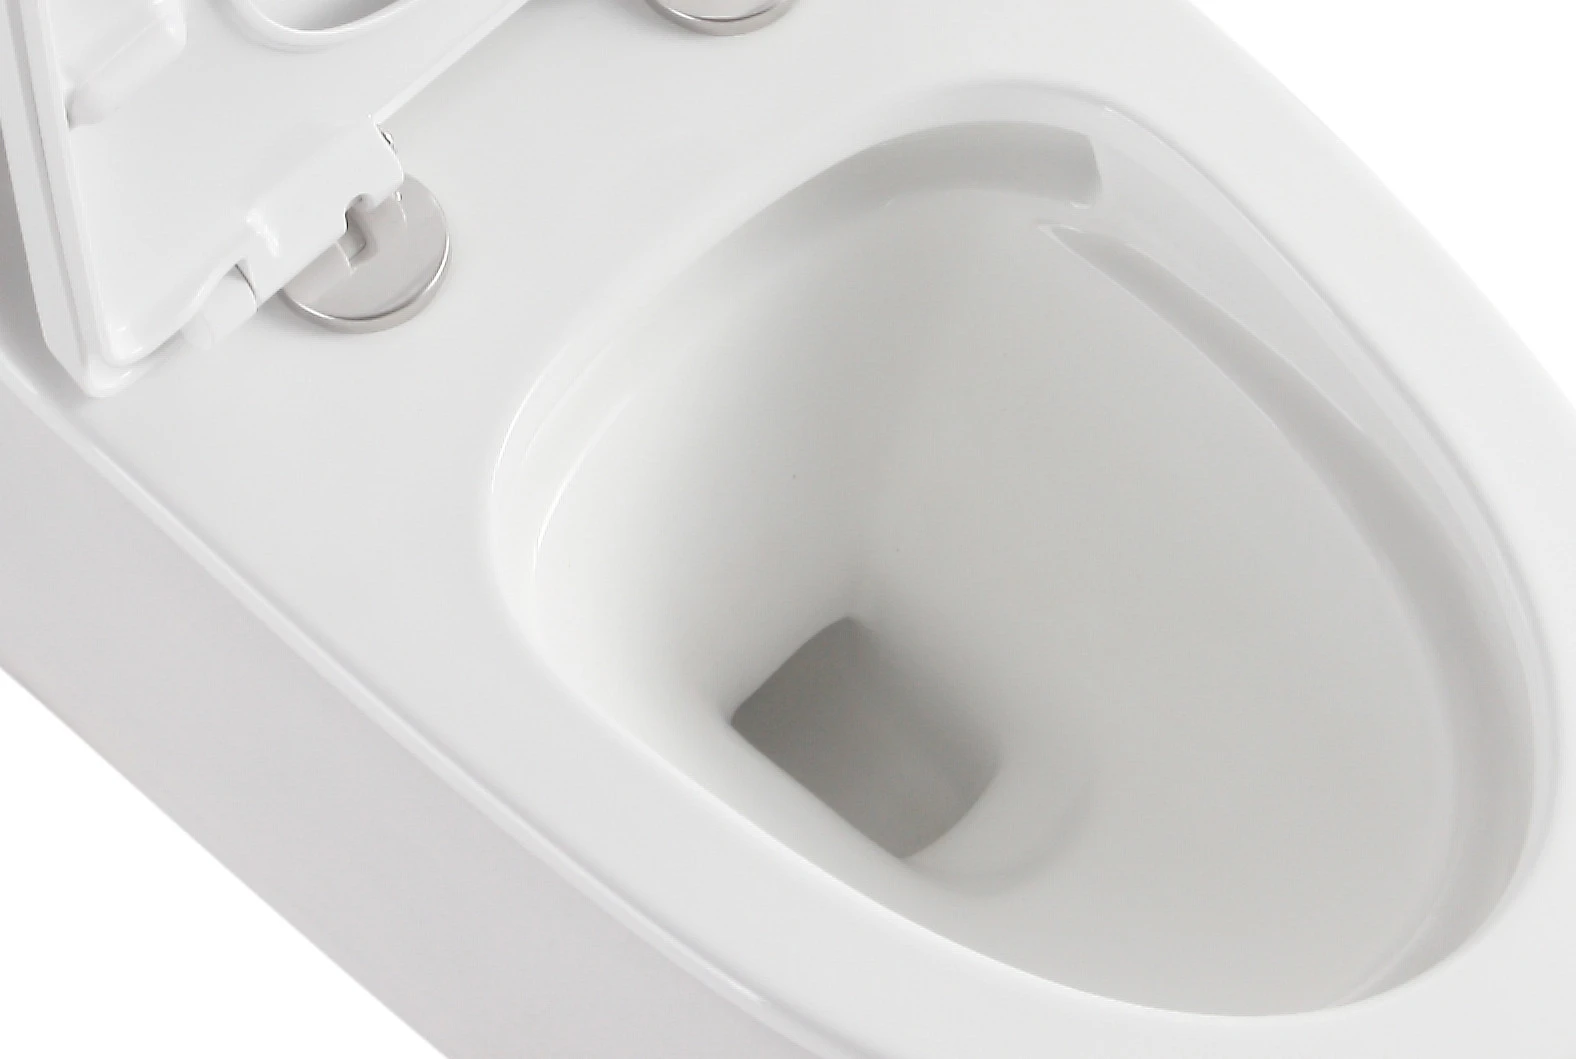 Hot sell high quality China supplier moden design south american siphonic water cloest one piece toilet